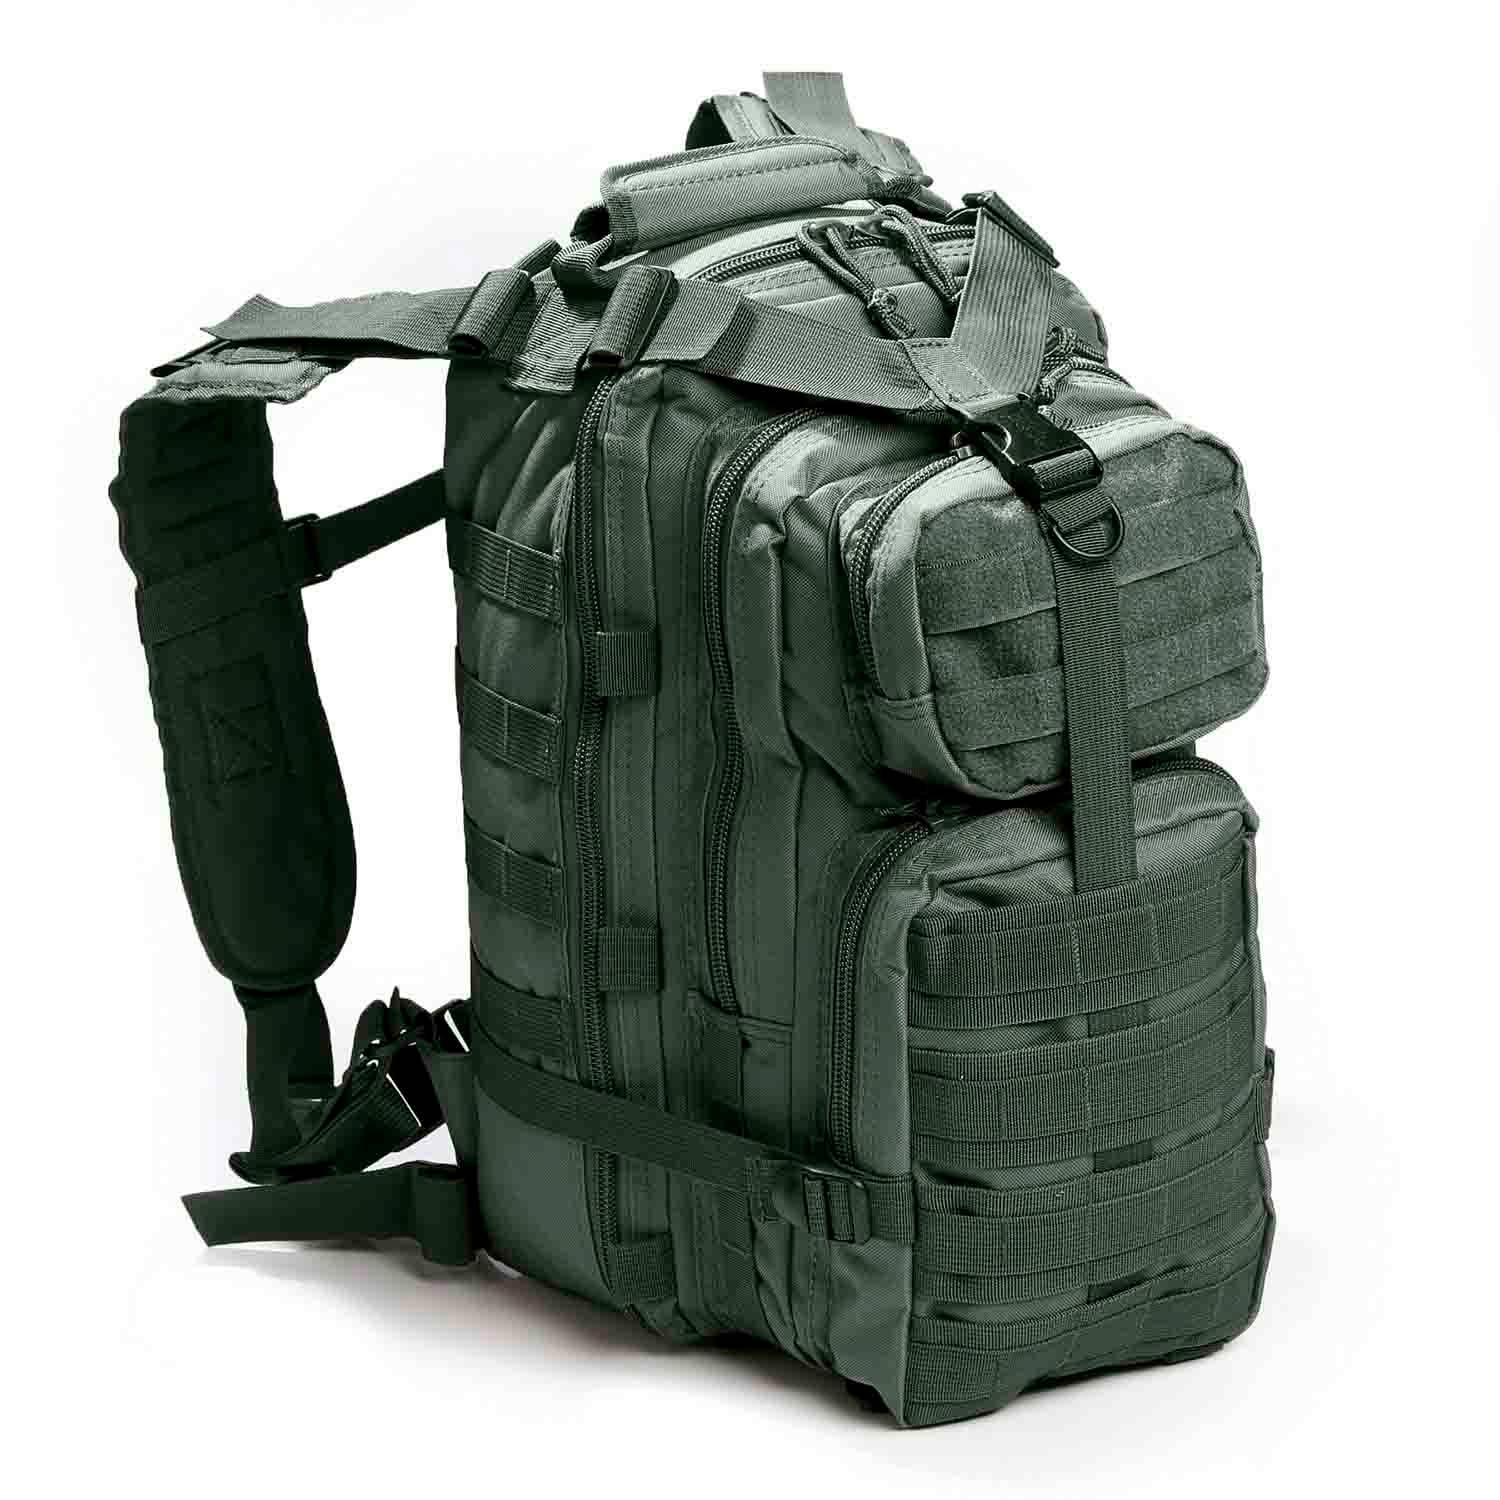 Galls Tactical Backpack | 2-Day MOLLE Backpack